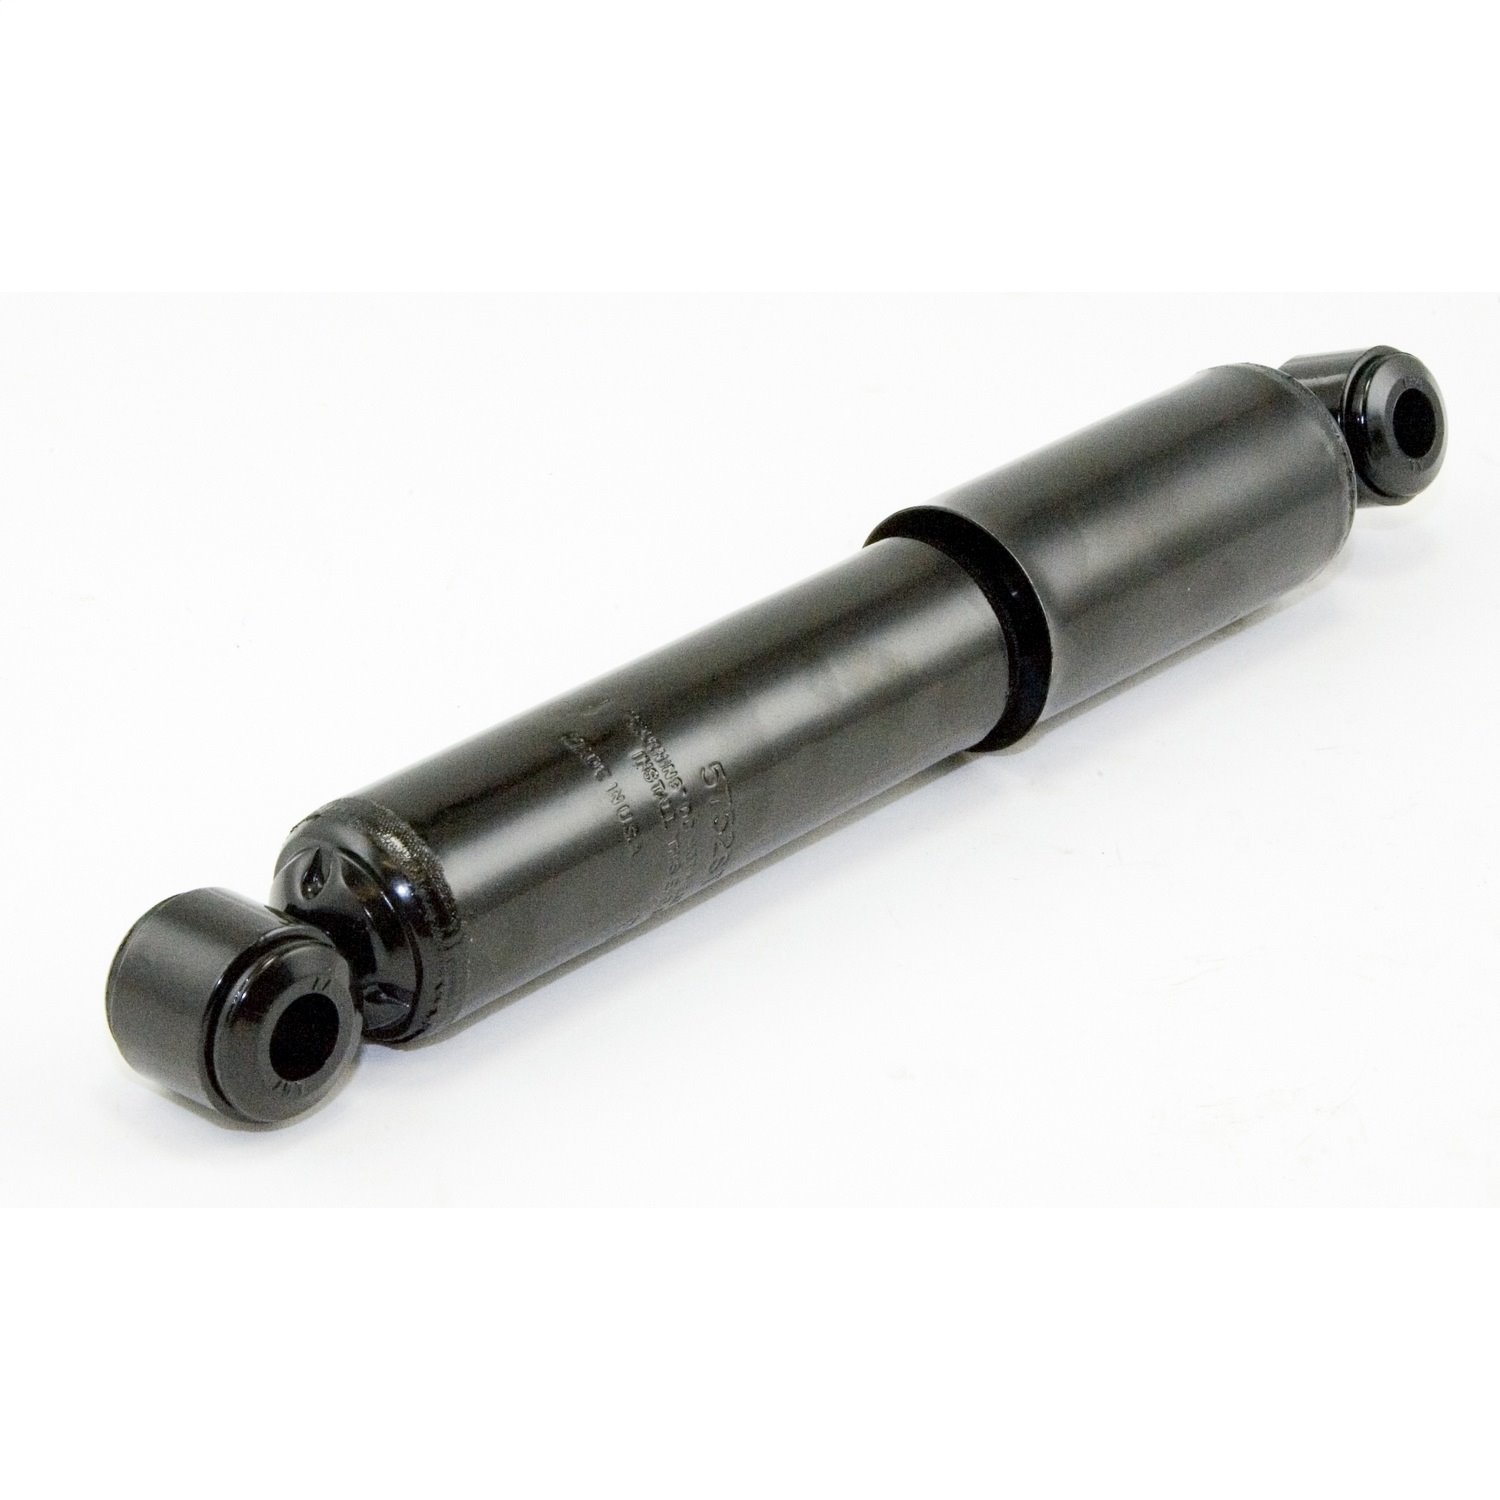 Replacement front shock absorber from Omix-ADA, Fits 47-54 Willys 2WD station wagons.